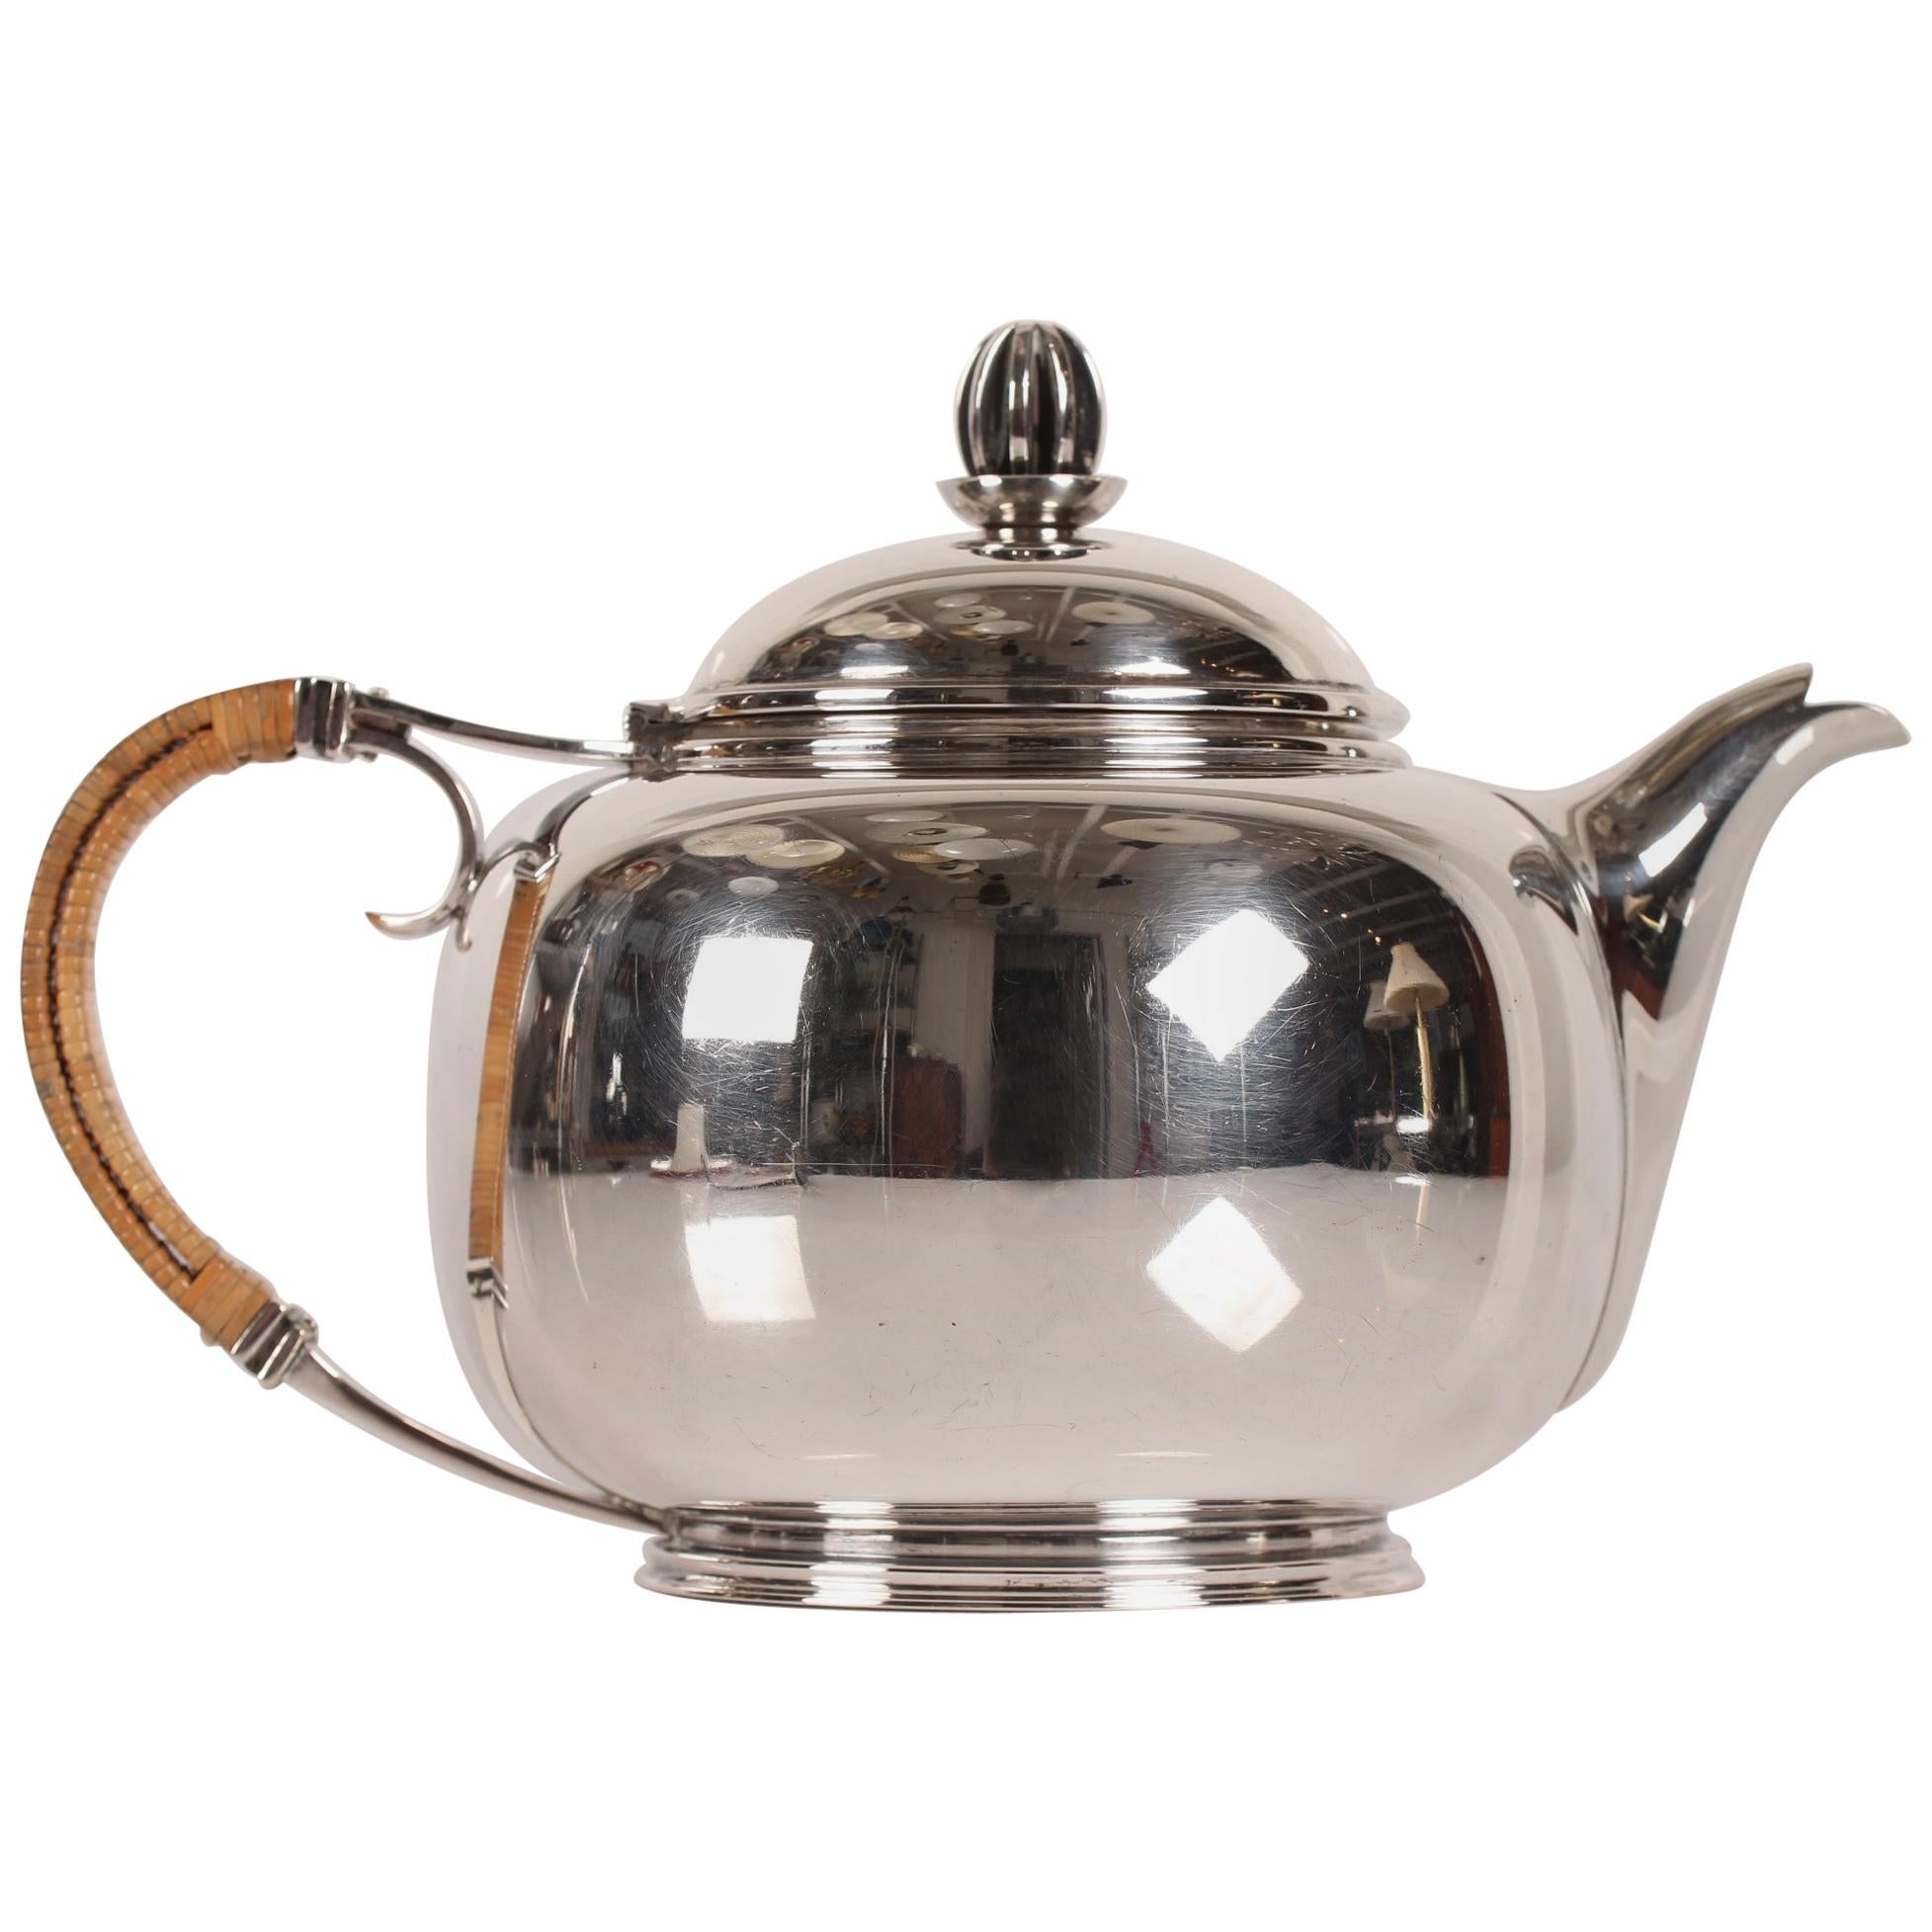 Art Deco Silver Teapot 830s with Straw Handle Made by Cohr Silver, Denmark, 1939 For Sale